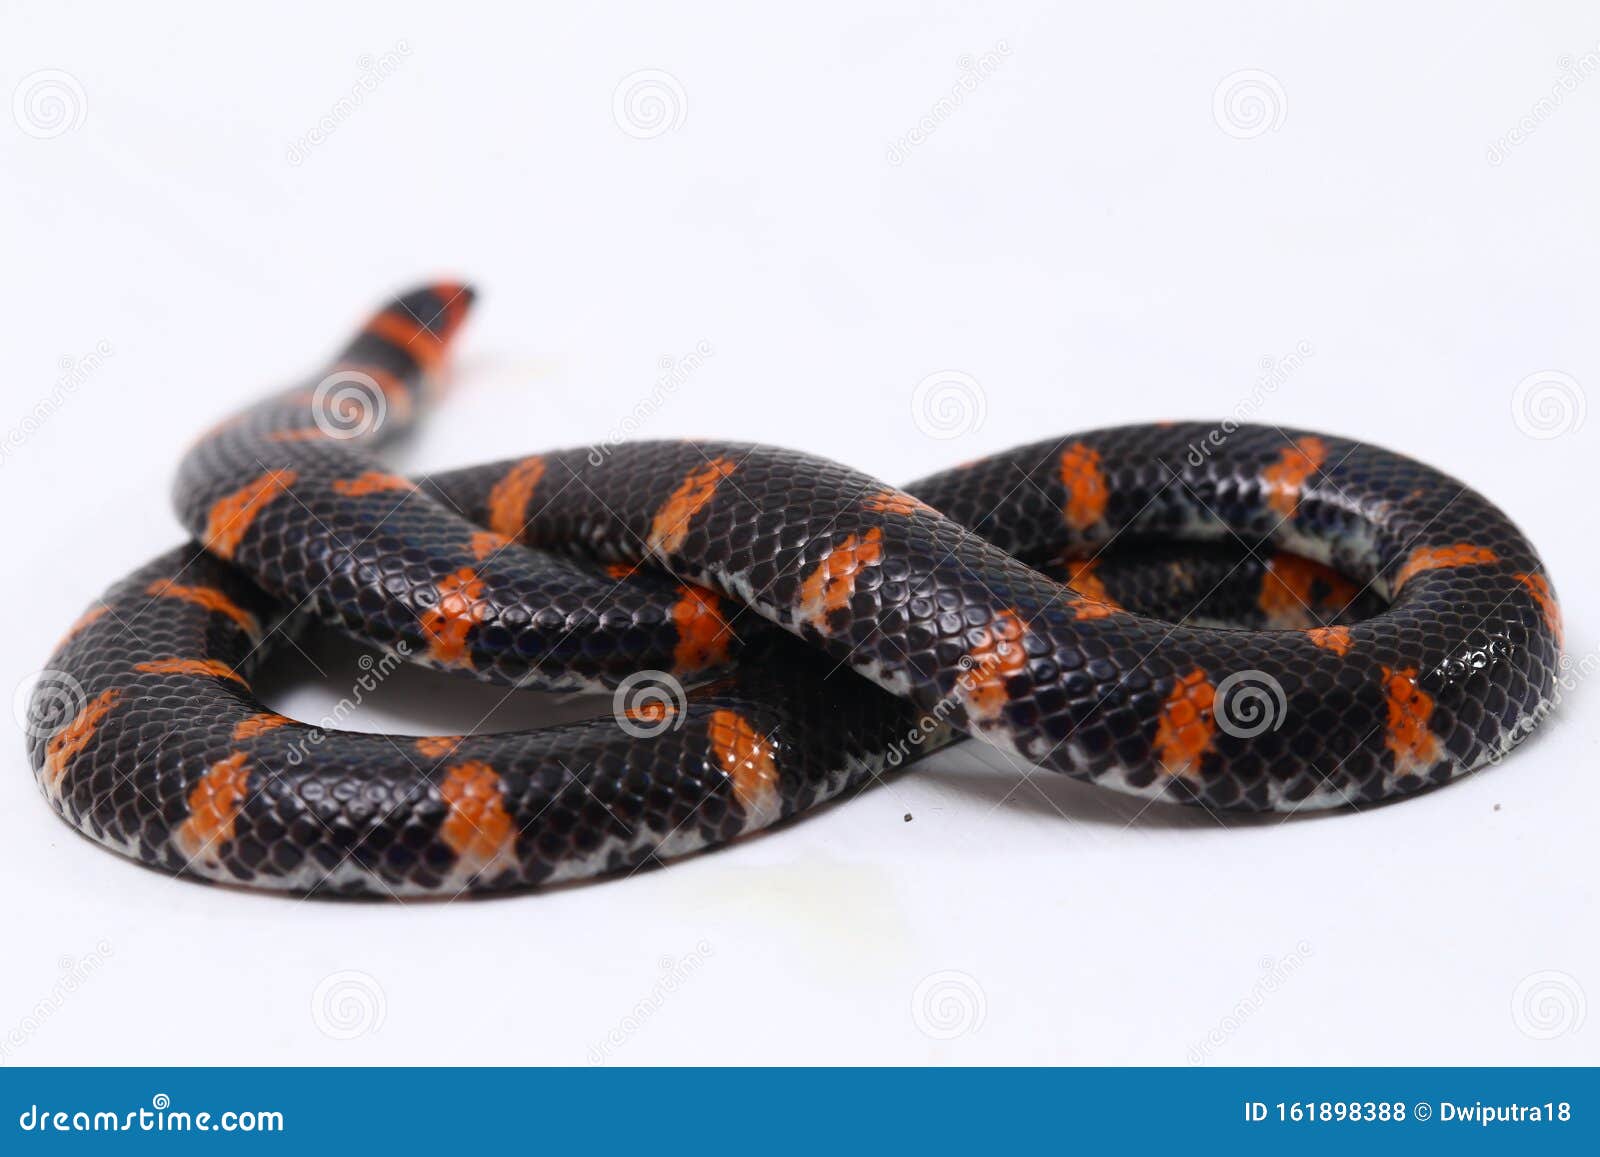 https://thumbs.dreamstime.com/z/red-tailed-pipe-snake-scientific-name-cylindrophis-ruffus-red-tailed-pipe-snake-scientific-name-cylindrophis-ruffus-isolate-161898388.jpg